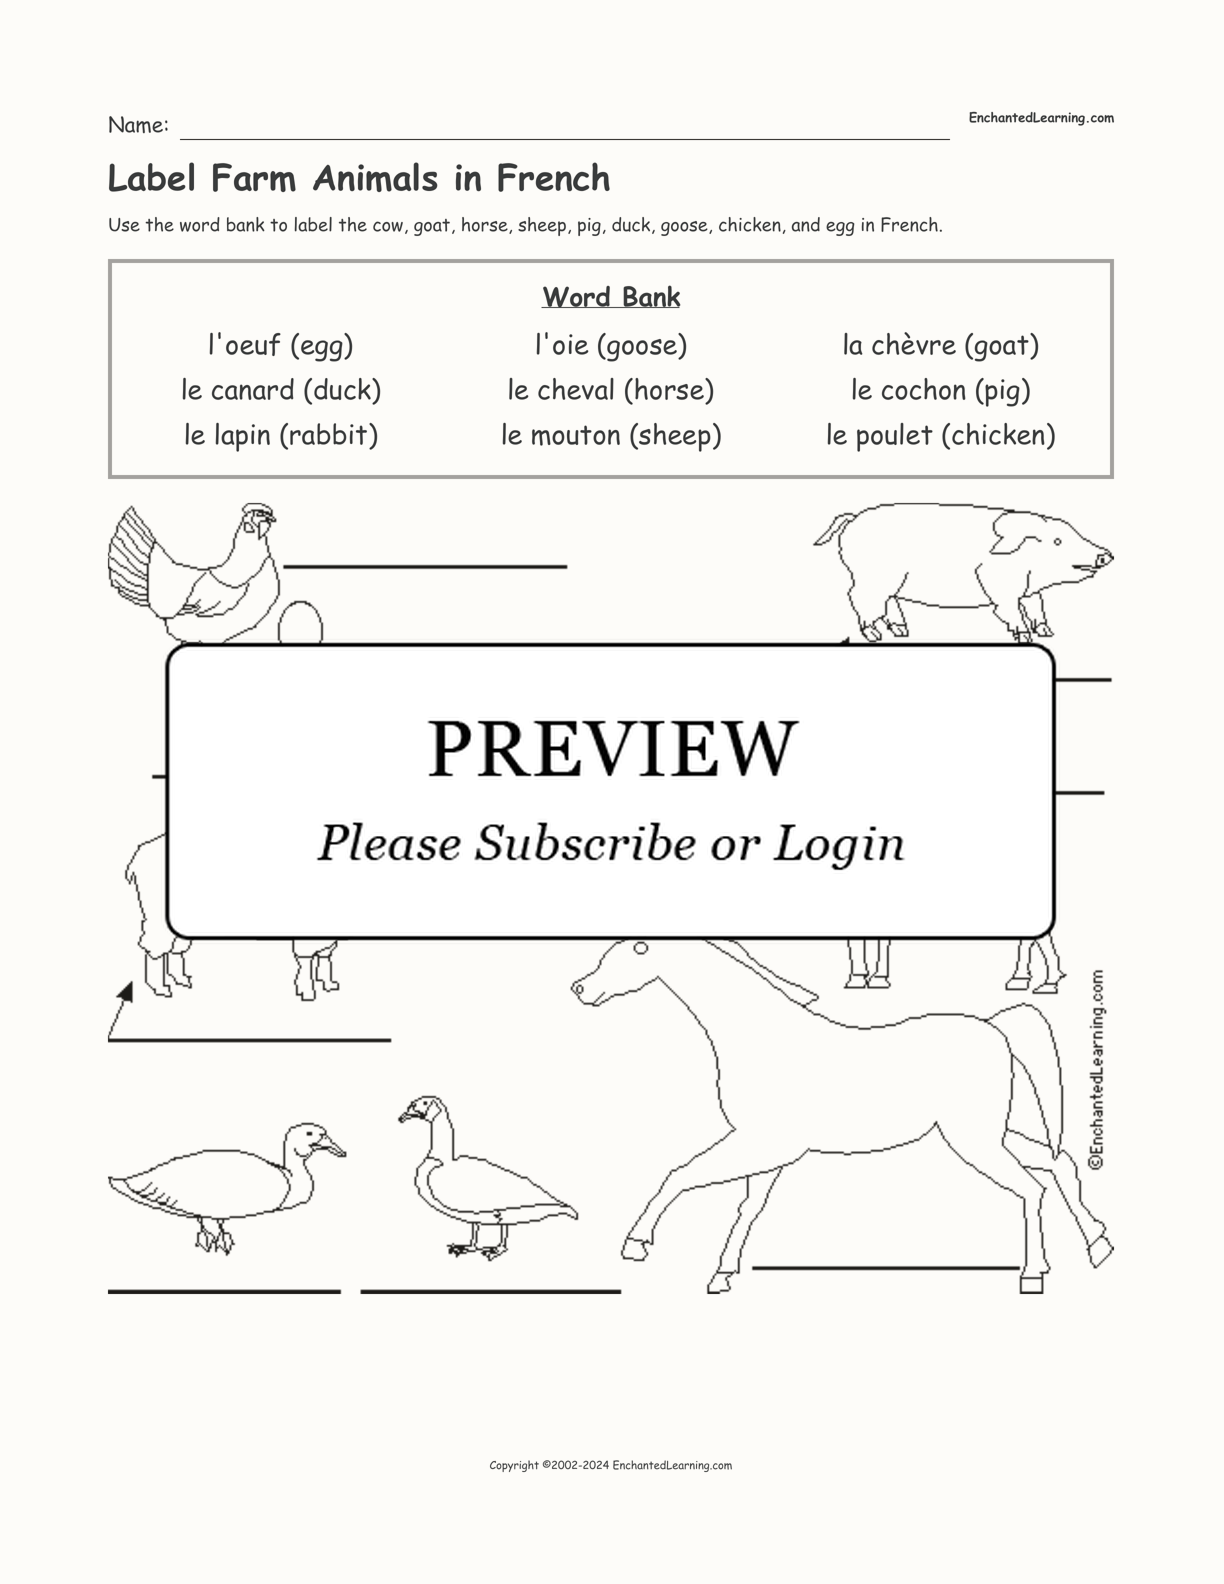 Label Farm Animals in French interactive worksheet page 1